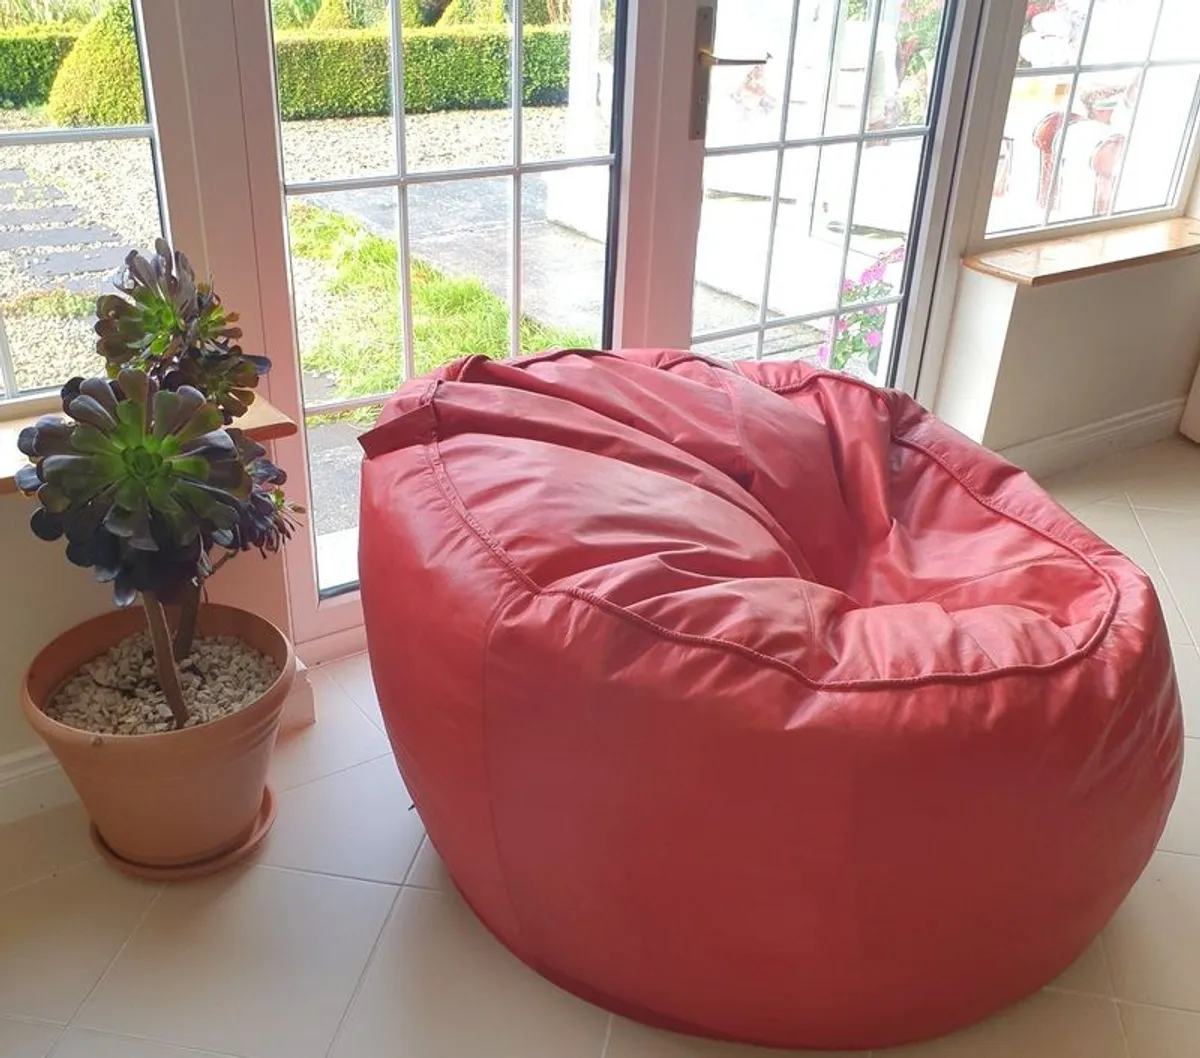 A Really Rare Fantastic Red Real Leather Giant Beanbag